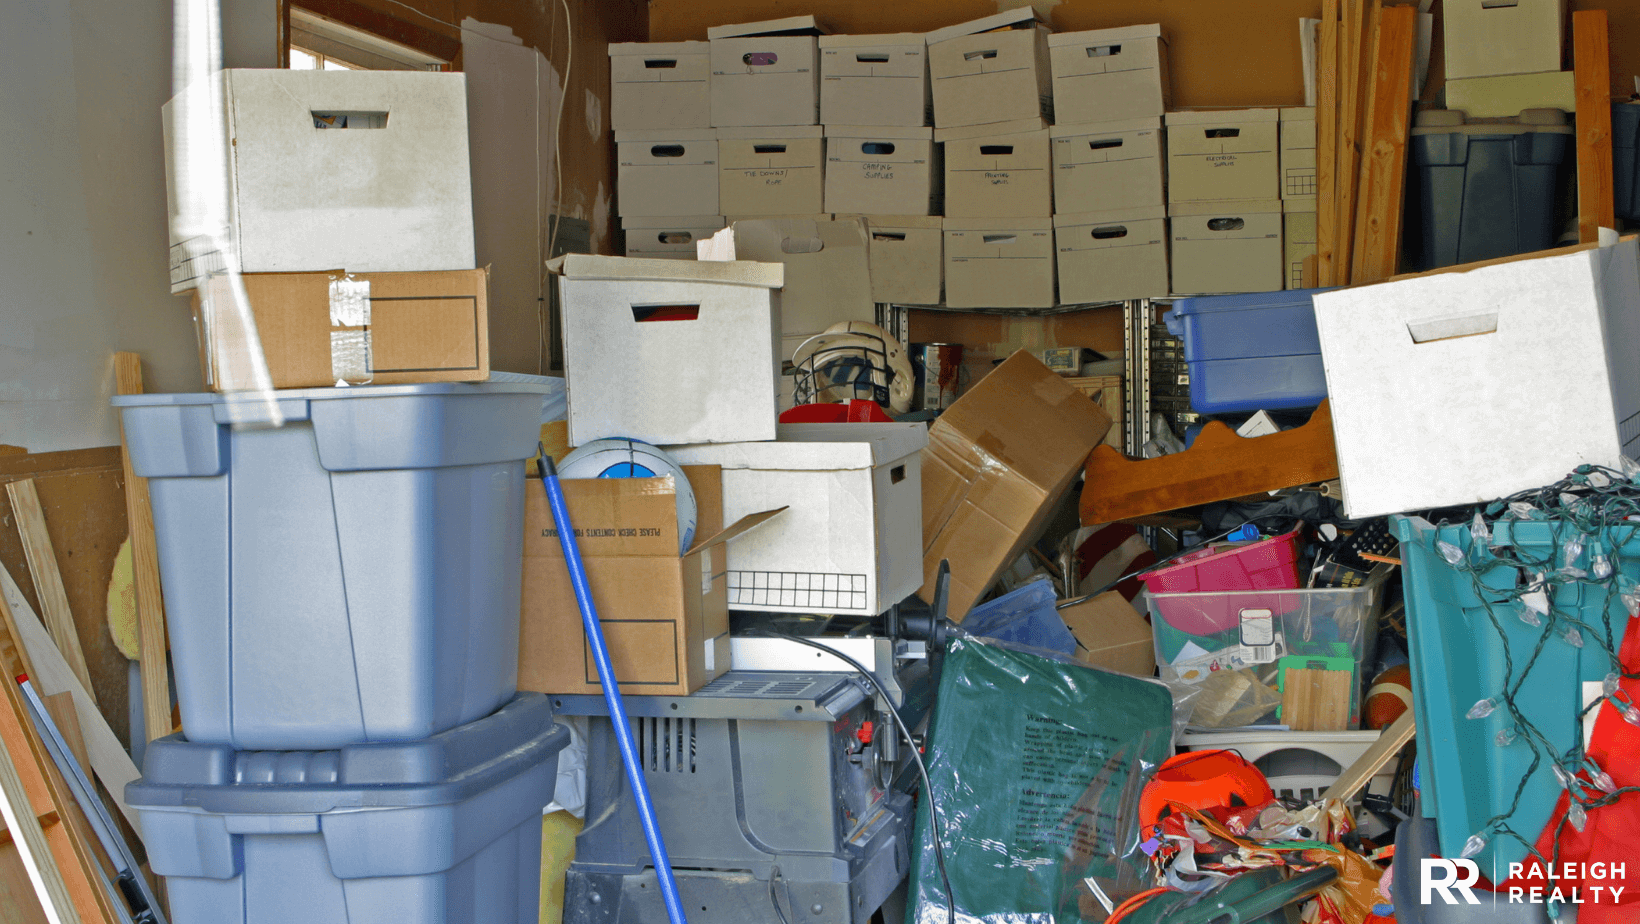 A messy garage filled with clutter and items that many would consider trash